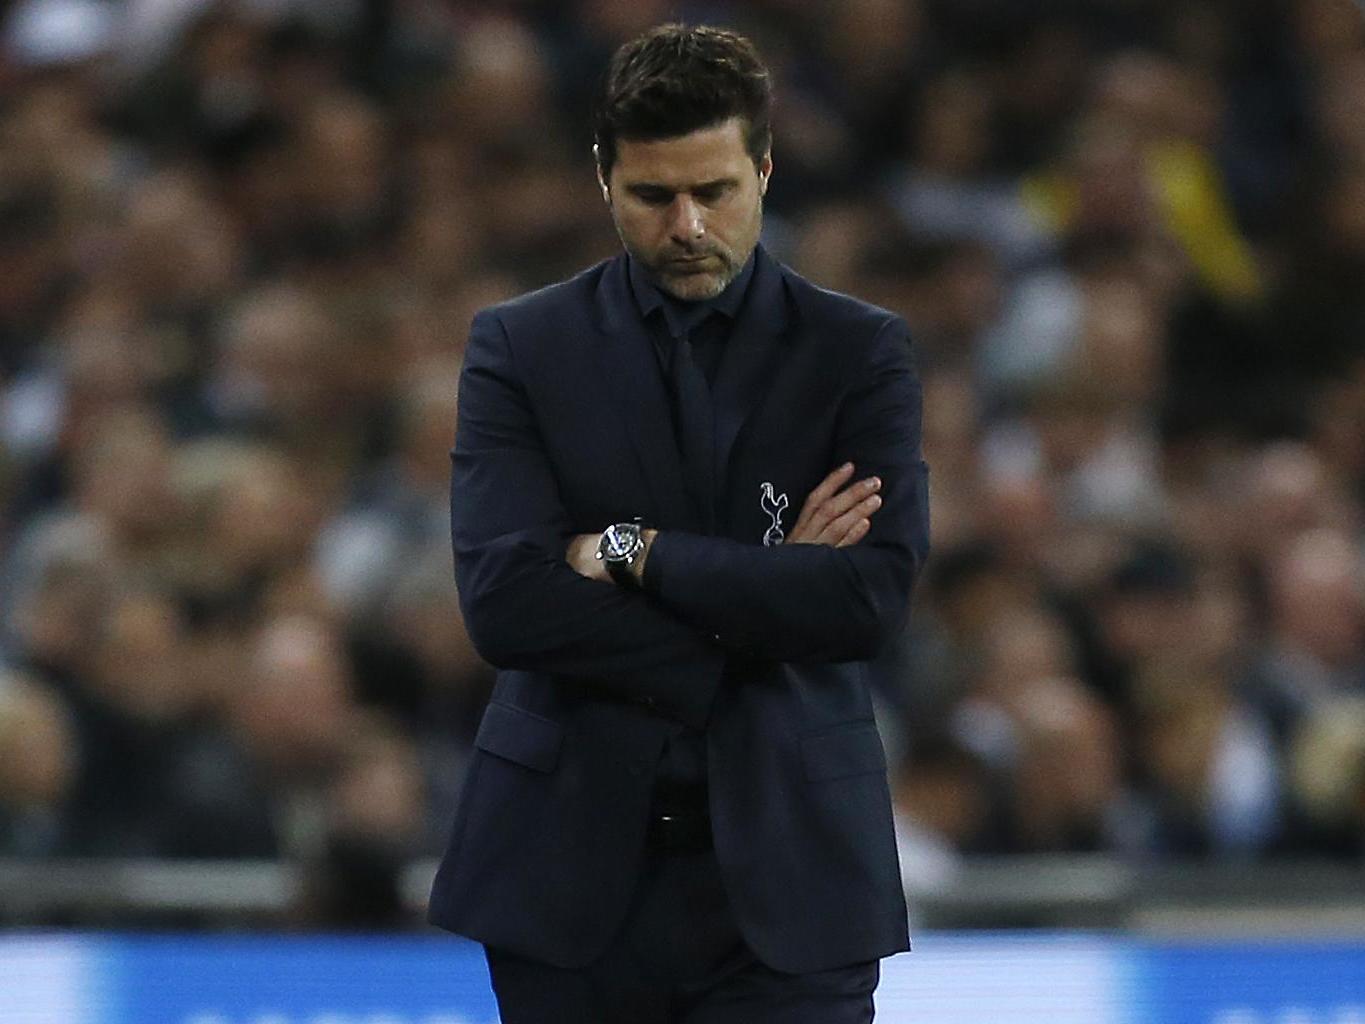 Frustrations are running high for the Tottenham manager